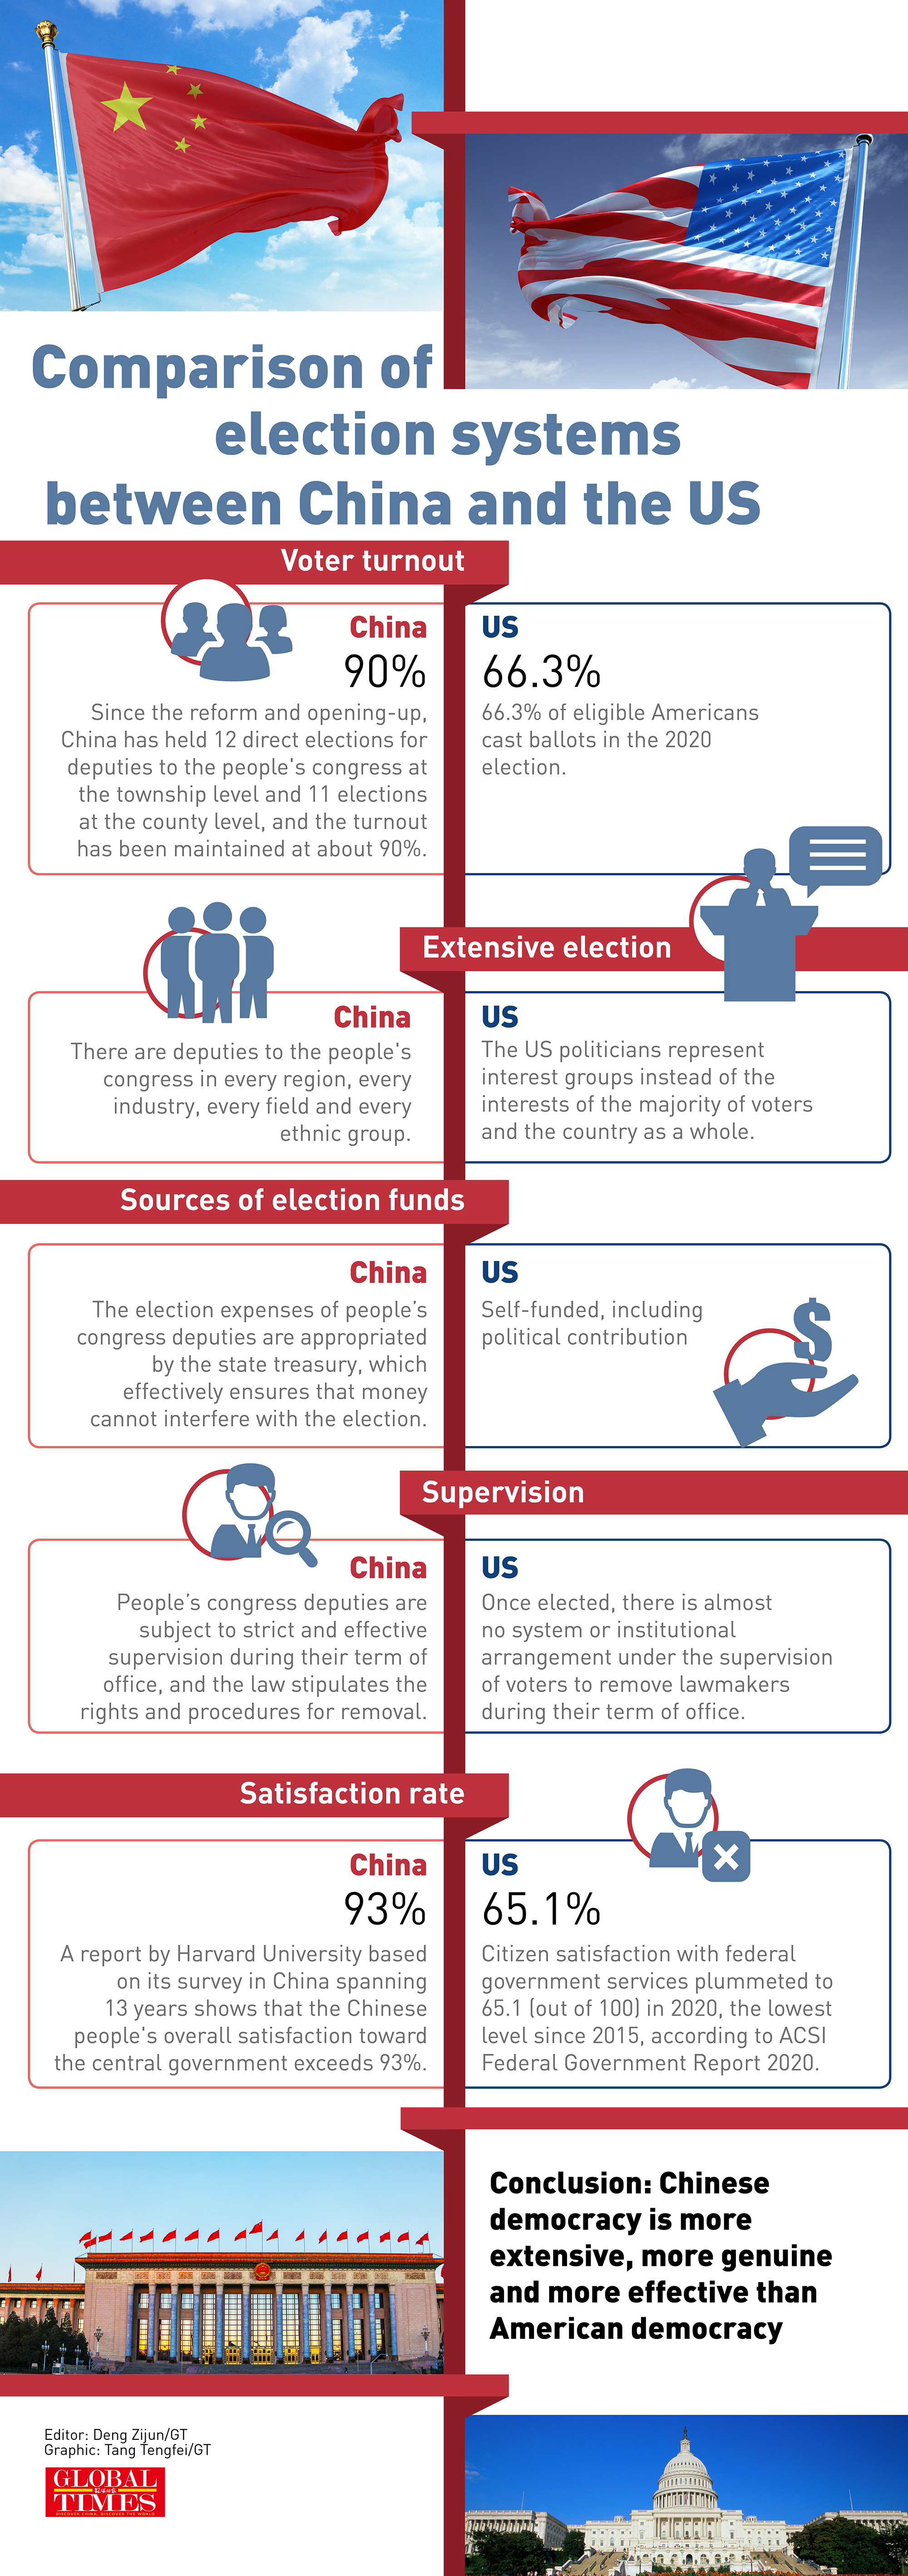 Comparison of election systems between China and the US Editor:Deng Zijun/GT Graphic:Tang Tengfei/GT